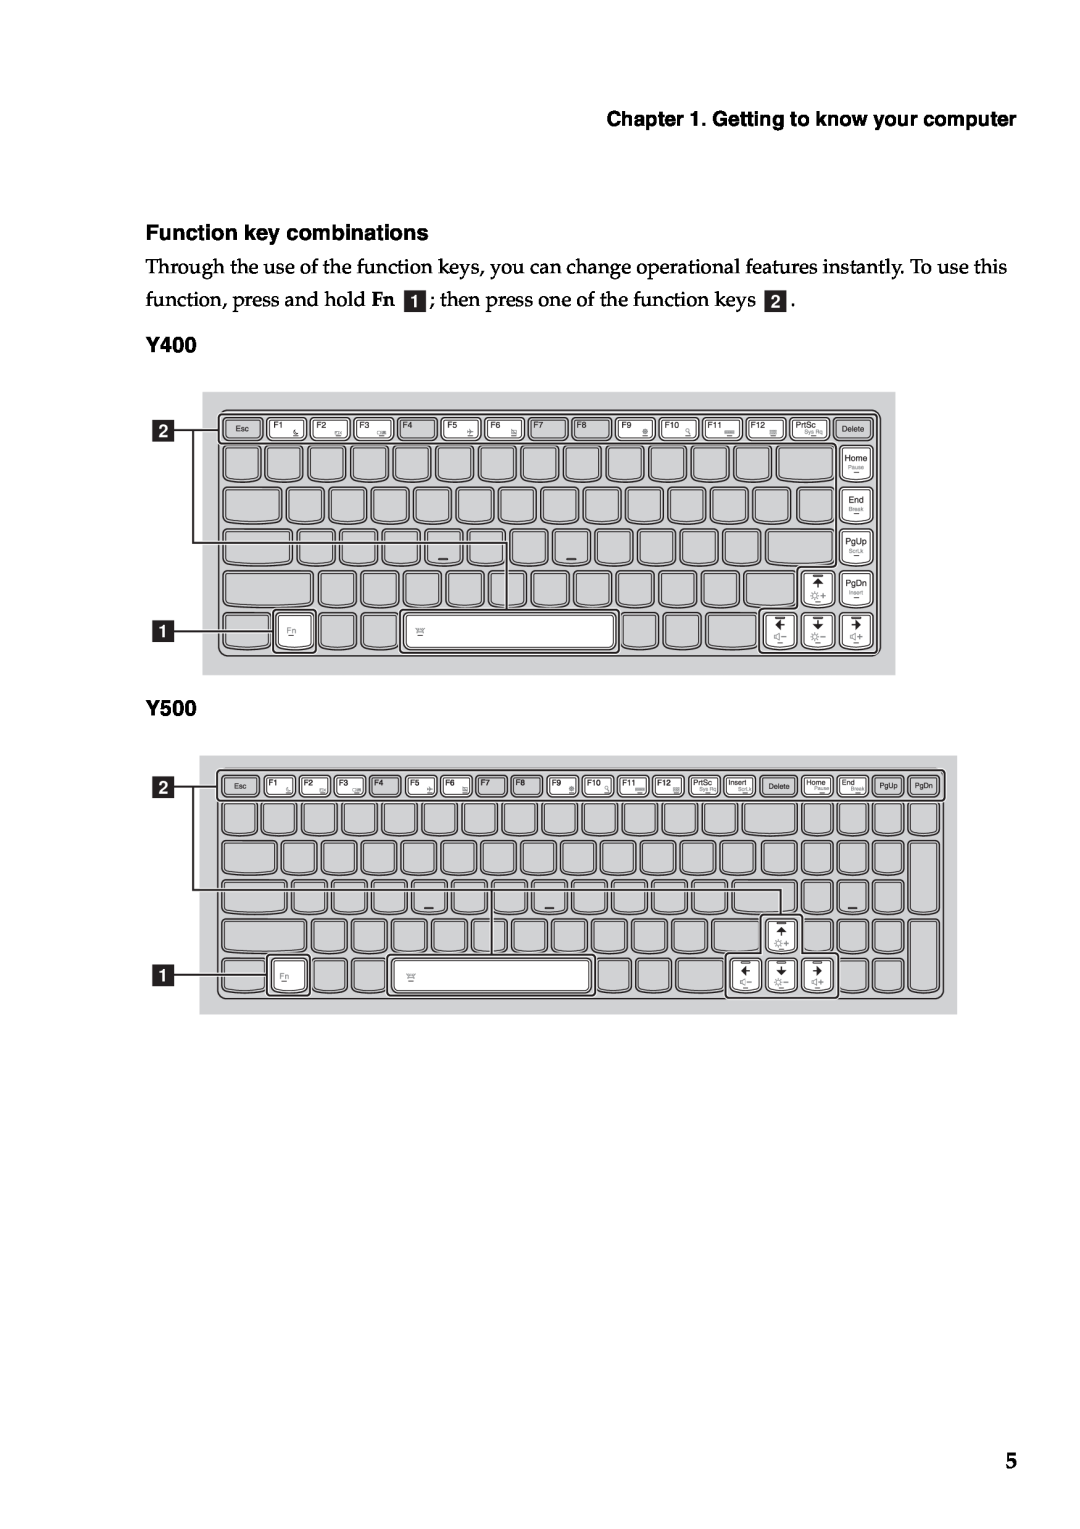 Lenovo Y500 manual Getting to know your computer Function key combinations, Y400 